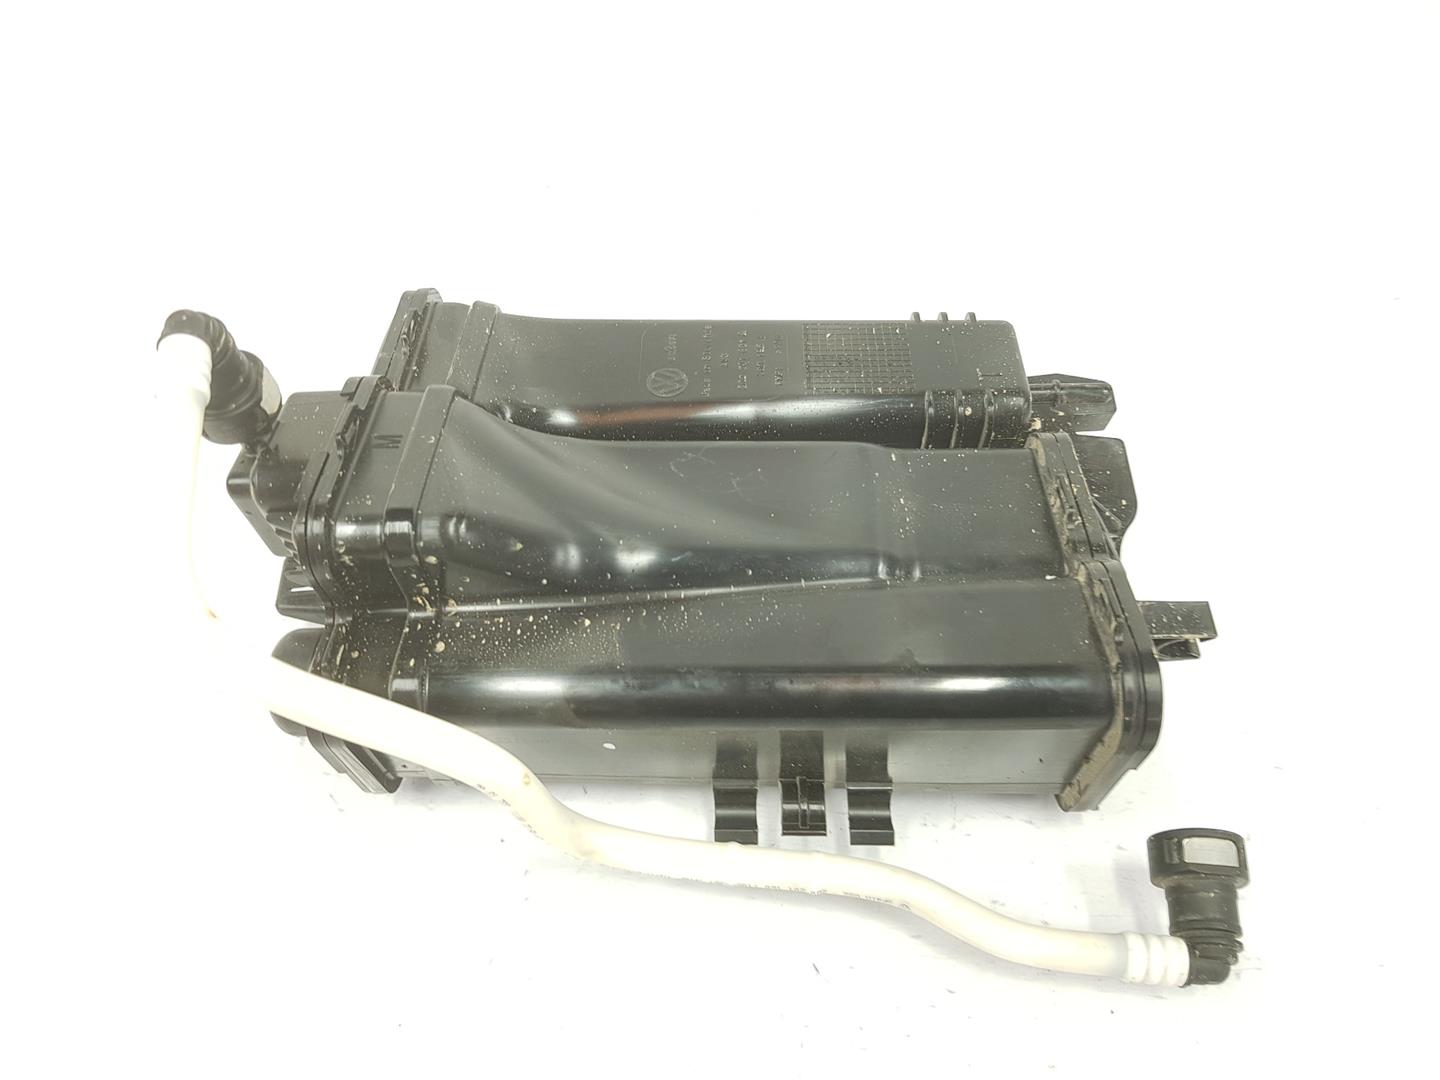 SEAT Alhambra 2 generation (2010-2021) Other Engine Compartment Parts 2Q0201801A, 2Q0201801A 20144225